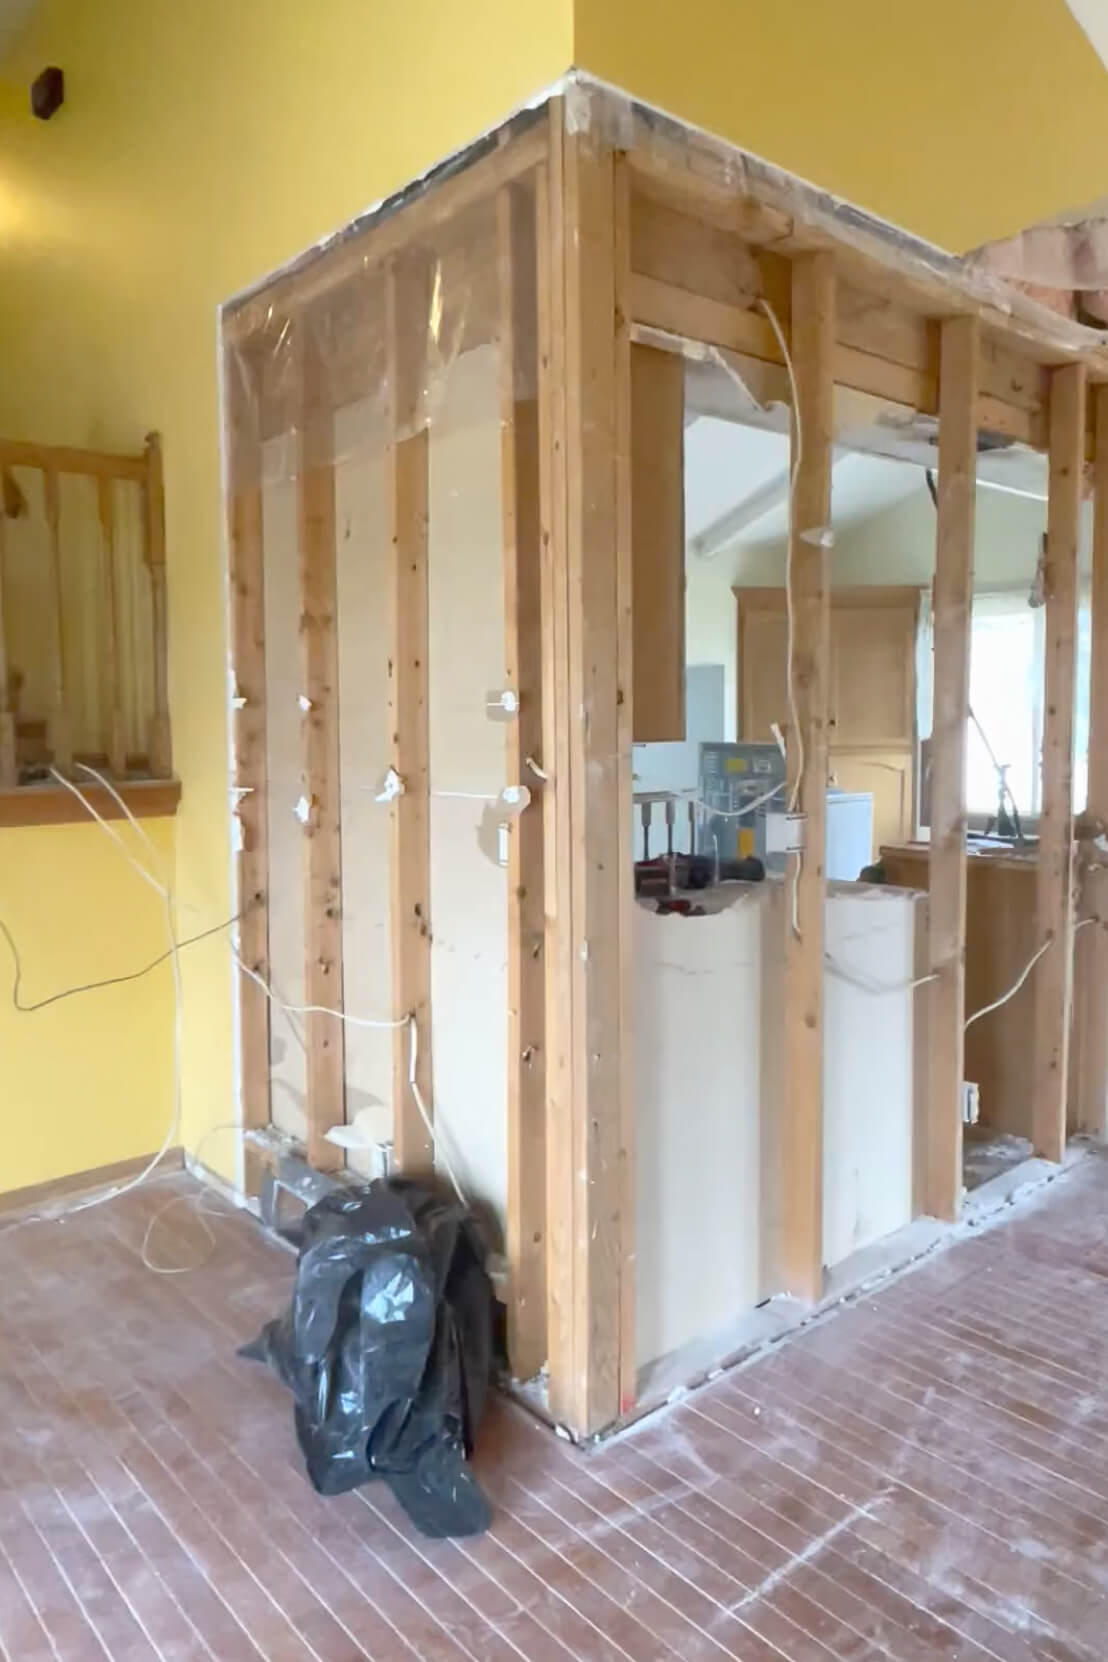 Removing drywall for kitchen remodel.